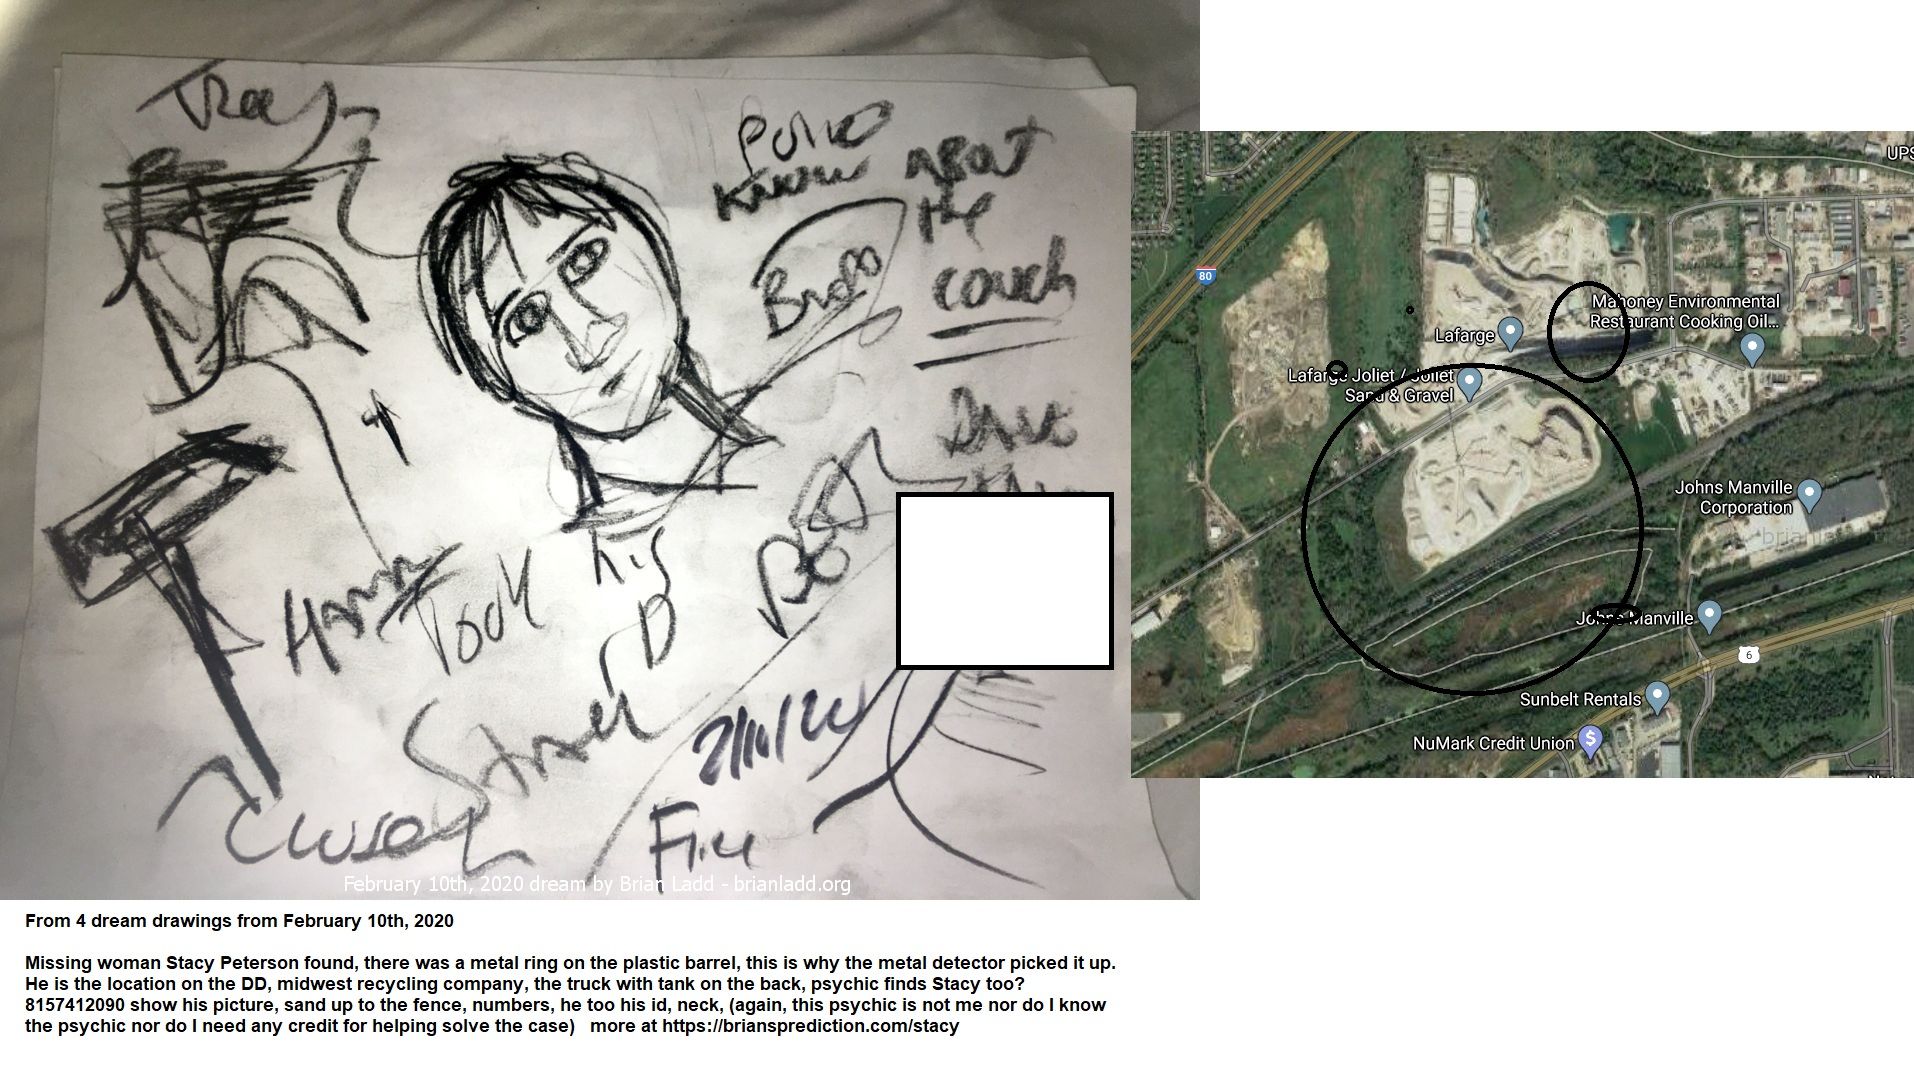 12715 10 February 2020 3 - From 4 Dream Drawings From February 10th, 2020  Missing Woman Stacy Peterson Found, There Was...
From 4 Dream Drawings From February 10th, 2020  Missing Woman Stacy Peterson Found, There Was A Metal Ring On The Plastic Barrel, This Is Why The Metal Detector Picked It Up.  He Is The Location On The Dd, Midwest Recycling Company, The Truck With Tank On The Back, Psychic Finds Stacy Too? 8157412090 Show His Picture, Sand Up To The Fence, Numbers, He Too His Id, Neck, (again, This Psychic Is Not Me Nor Do I Know The Psychic Nor Do I Need Any Credit For Helping Solve The Case)  More At   https://briansprediction.com/Stacy  Cae Info  N Late October, Cities And Towns Around The Country Were All Tricked Out In Halloween Decorations. Up And Down The Neighborhoods, Families Prepared For Fright Night.  But This Year, The Village Of Bolingbrook, A Chicago Suburb, Was Plunged Into A Real-Life Mystery Far More Chilling Than Any Halloween Haunting Could Ever Be.  On Oct. 28, Stacy Peterson, 23 Years Old -- Wife, Mother, Sister -- Suddenly Vanished. She Went Missing And Is Yet To Be Found.  Her Husband Drew Said She'D Run Off With Another Man.  Drew Peterson: Iâ€™M Still In Love With Stacy And I Miss Her, So... (he Puts Up Hand And Walks Away)  But Her Family Suspected Foul Play And Launched A Massive Search.  Volunteers Combed Through Forests And Fields. Police Took To The Air And The Water.  Advertise  But It Wouldn'T Go Away. As The Days Dragged By With No Sign Of Stacy -- And No Word From Her Either -- The Questions Piled Up. So Did The Suspicions And The Speculation About The Role Of Stacyâ€™S Husband Drew. He Says All The Attention Forced Him To Speak Out.  Drew Peterson: Iâ€™M Really Being Portrayed As A Monster Here. Nobody'S Defending Me. Nobody'S Stepping Up To Say, "No, He'S A Decent Guy. He Helps People. He Does This. He Does That." So Somebody'S Got To Say Something.  Tonight We'Ll Hear From Drew Peterson, Along With Other Family Members And Friends, As We Try To Piece Together What Really Happened To Stacy Peterson.  Drew Peterson: I Don'T Believe She'S Missing. I Believe She'S Where She Wants To Be.  Drew Peterson Was One Of Bolingbrookâ€™S Finest -- A Police Sergeant With More Than Two Decades Of Experience -- When He Met Stacy In 2001. At The Time Peterson Was 47 Years Old. Stacy, A High-School Graduate, Was Just 17 -- 30 Years His Junior.  Hoda Kotb: I Know People Said, "Whatâ€™s Going On There?&Quot;  Drew Peterson: Sure.  But Peterson Says He Squared The Age Gap With Stacy.  Drew Peterson: I Said, "Do You Mind That Iâ€™M 47?&Quot; And She Goes, "Do You Mind That Iâ€™M 17?&Quot; Just Like, Kind Of Like, A Weird Feeling. But I-- She Was Beautiful. And It Was Exciting Having A Young, Beautiful Woman Interested In Me. And I Pursued The Relationship.  And, He Says, Stacy Did Too.  Drew Peterson: Every Time I Tried To Get Out Of The Relationship, She Would Pursue Me. Leaving Little Roses And Notes On My Car And Stuff. So It Was Like It Was Exciting. So--  Hoda Kotb: So Was It Love Like That?  Drew Peterson: Pretty Quick. Pretty Quick. So--  Hoda Kotb: So The Relationship Started. She Was Like A Kid, I Mean, In A Way. Just Very Naive.  Drew Peterson: Well. She Was Very Mature For Her Age In A Lot Of Senses Because She Had A Very Tough Upbringing.  Stacy Ann Cales Was The Third Of Five Children Born To Anthony And Christie Cales. Two Siblings Died Young. Court Records Show That Stacyâ€™S Mom Was In And Out Of Trouble With The Law. Her Mother Took Off For Good In 1998 And Her Dad Began Moving The Family.
